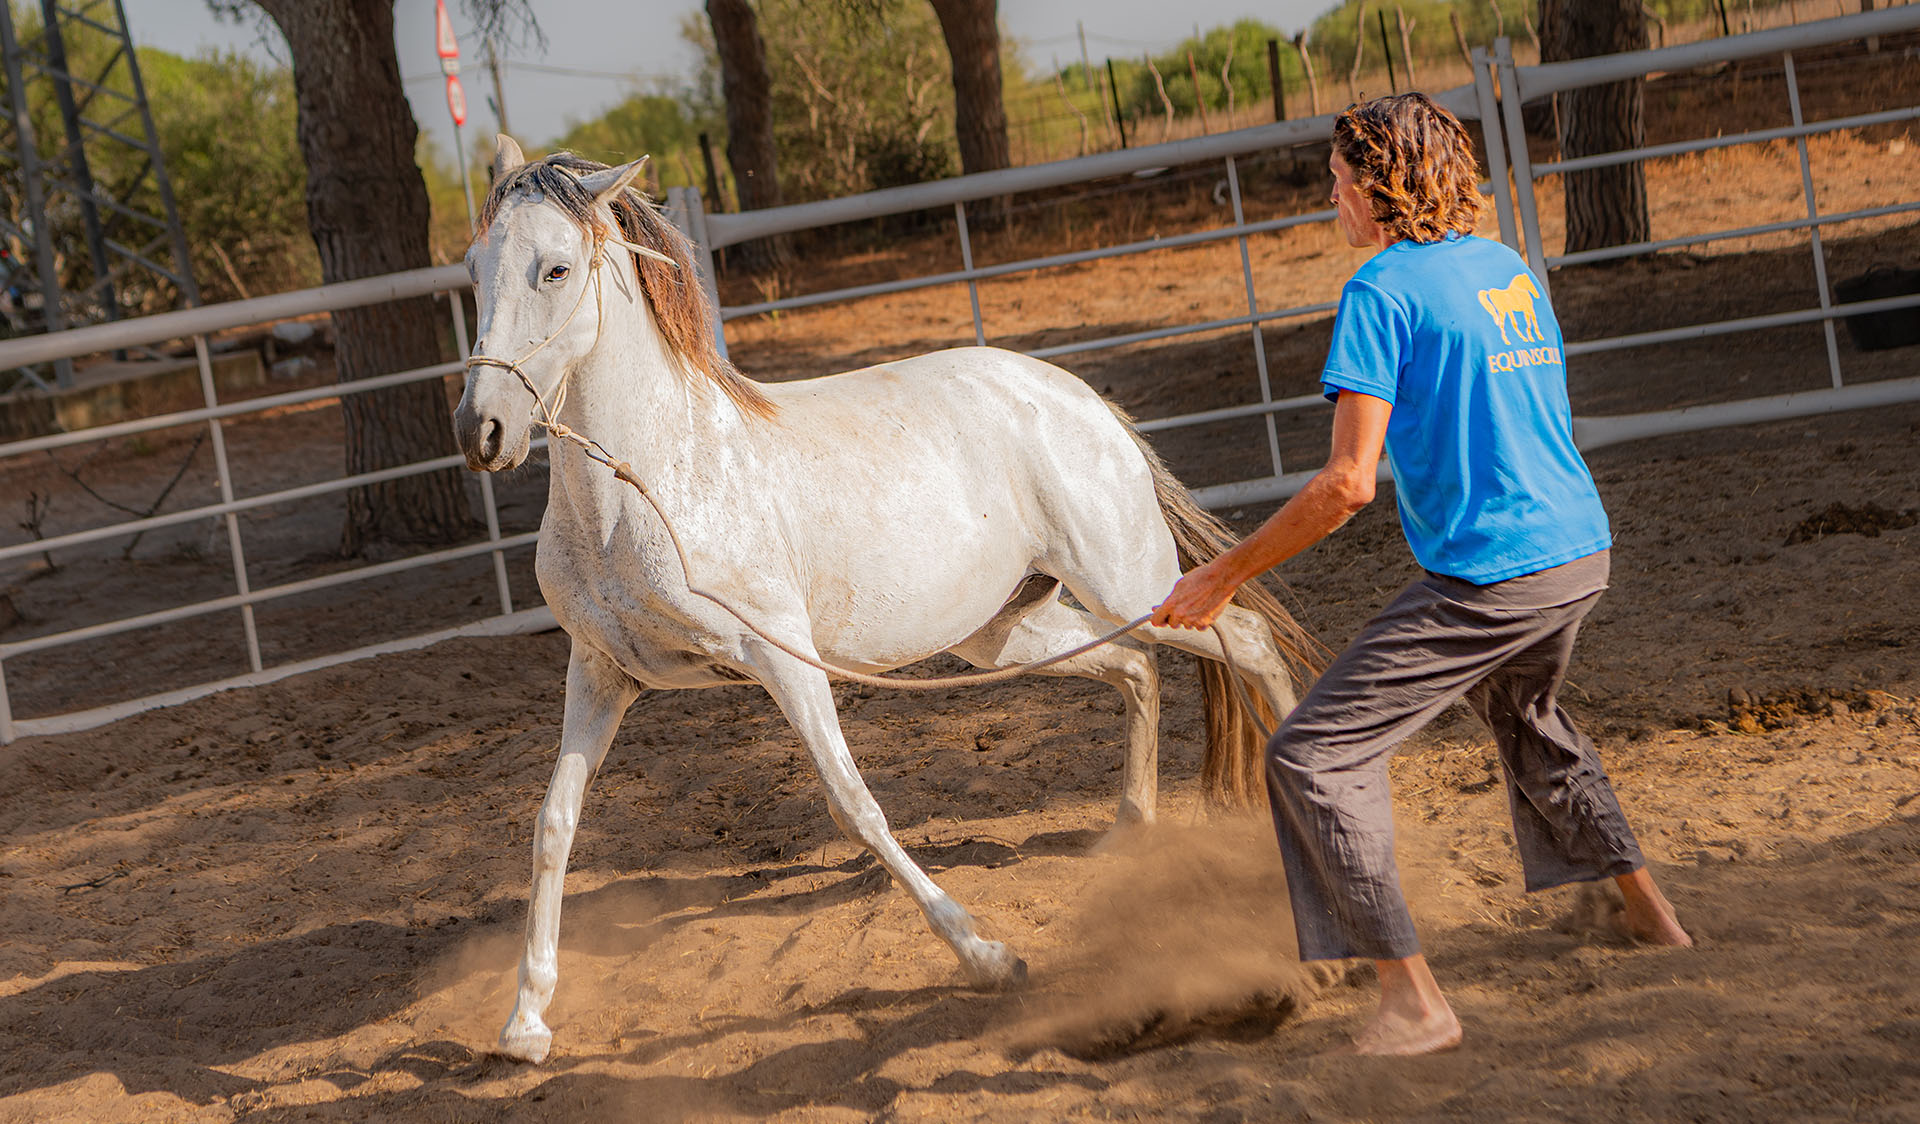 TRAINING AND TRAINING OF COLTS AND HORSES